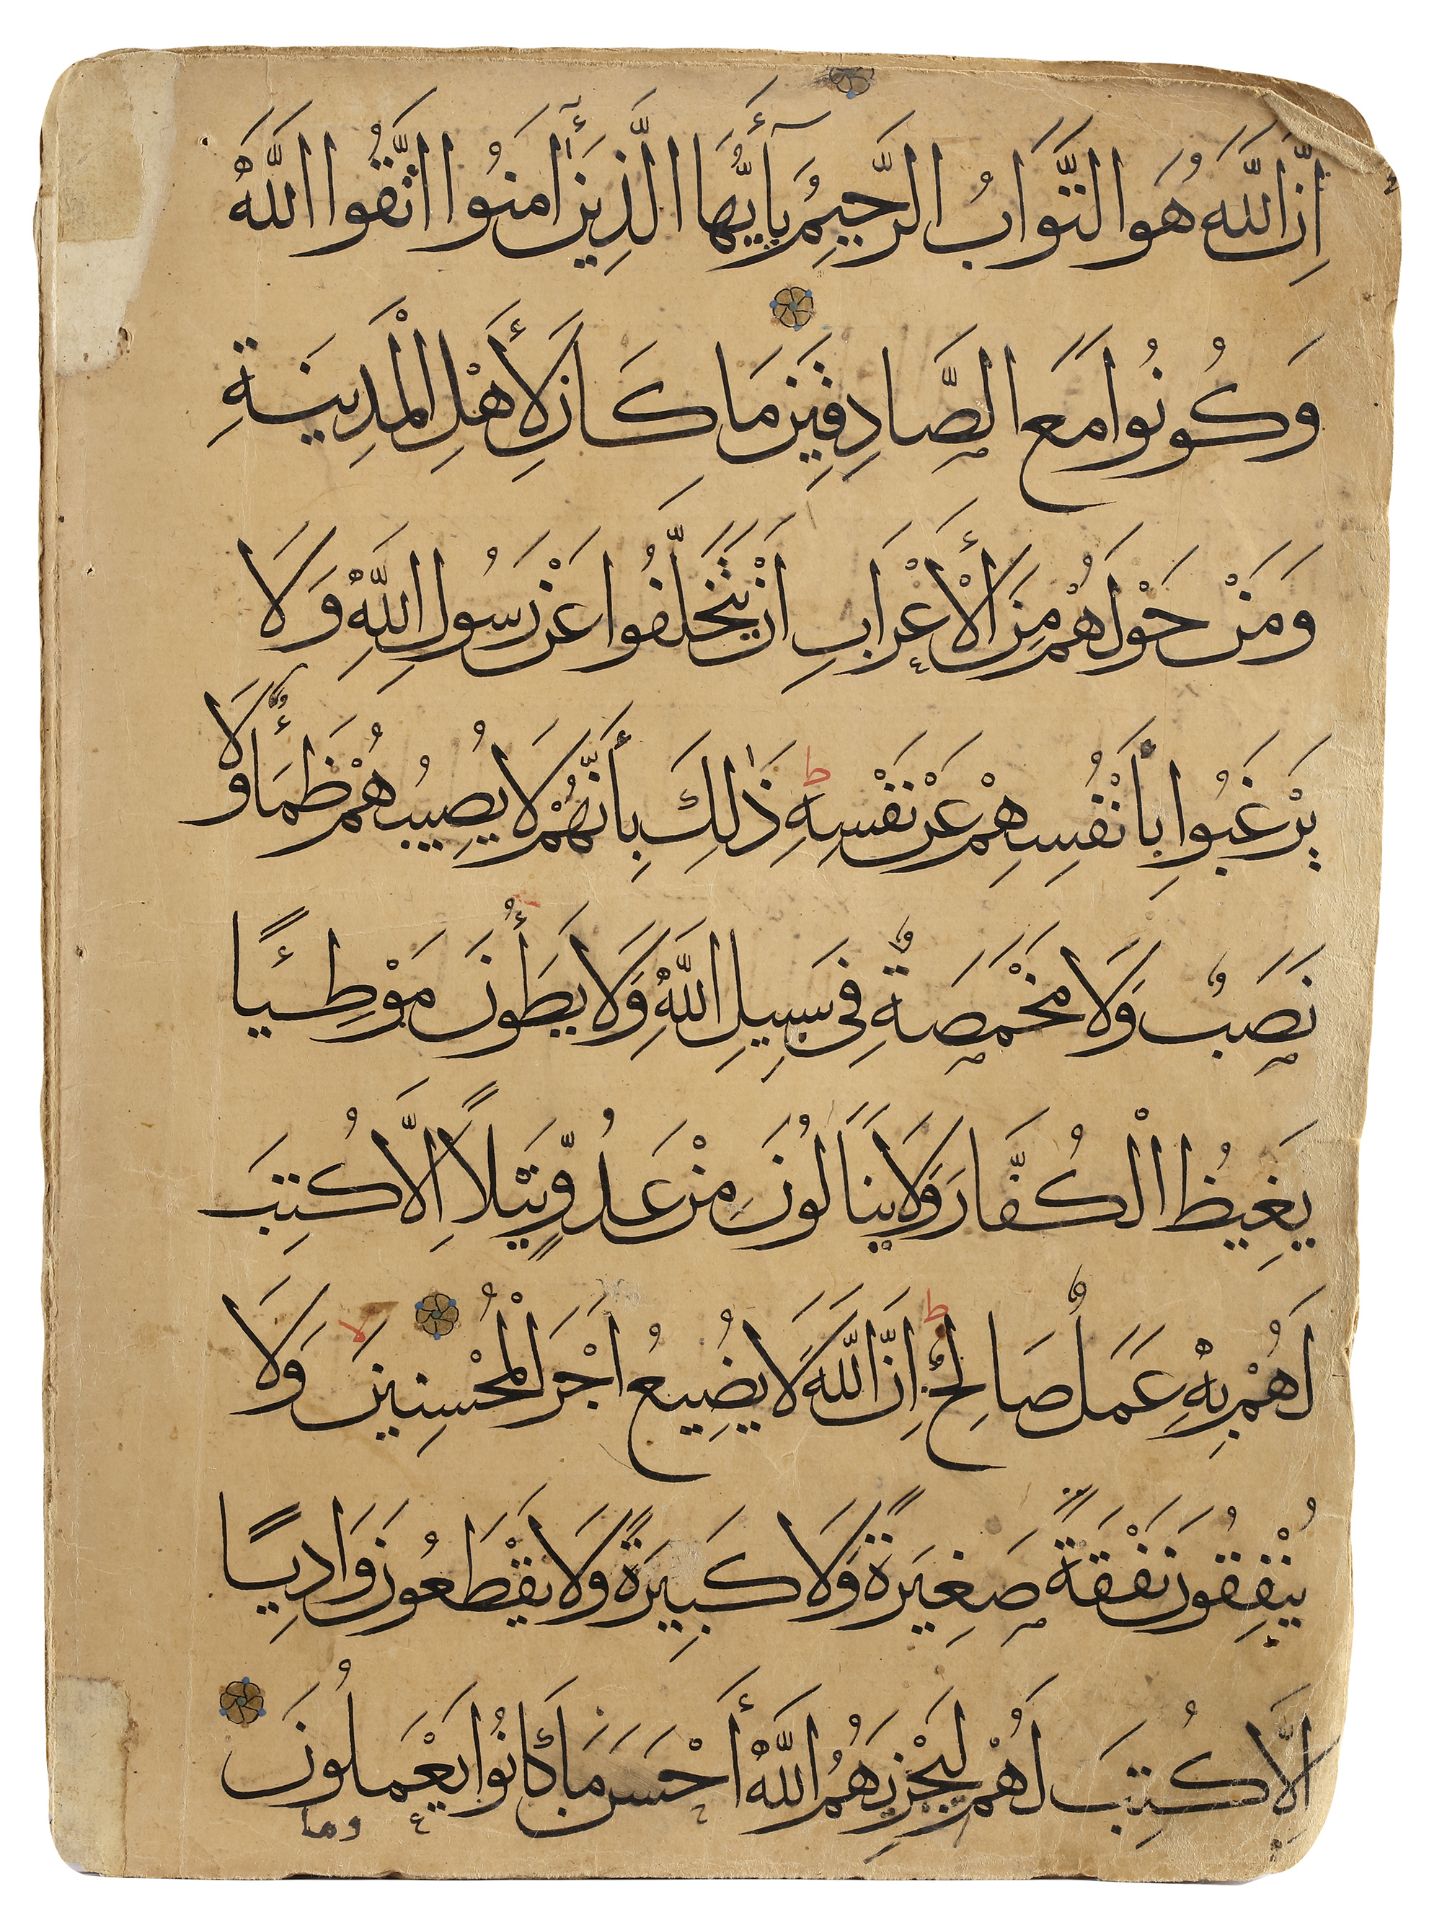 THREE MAMLUK QURAN PAGES, EGYPT OR SYRIA, 13TH-14TH CENTURY - Image 4 of 4